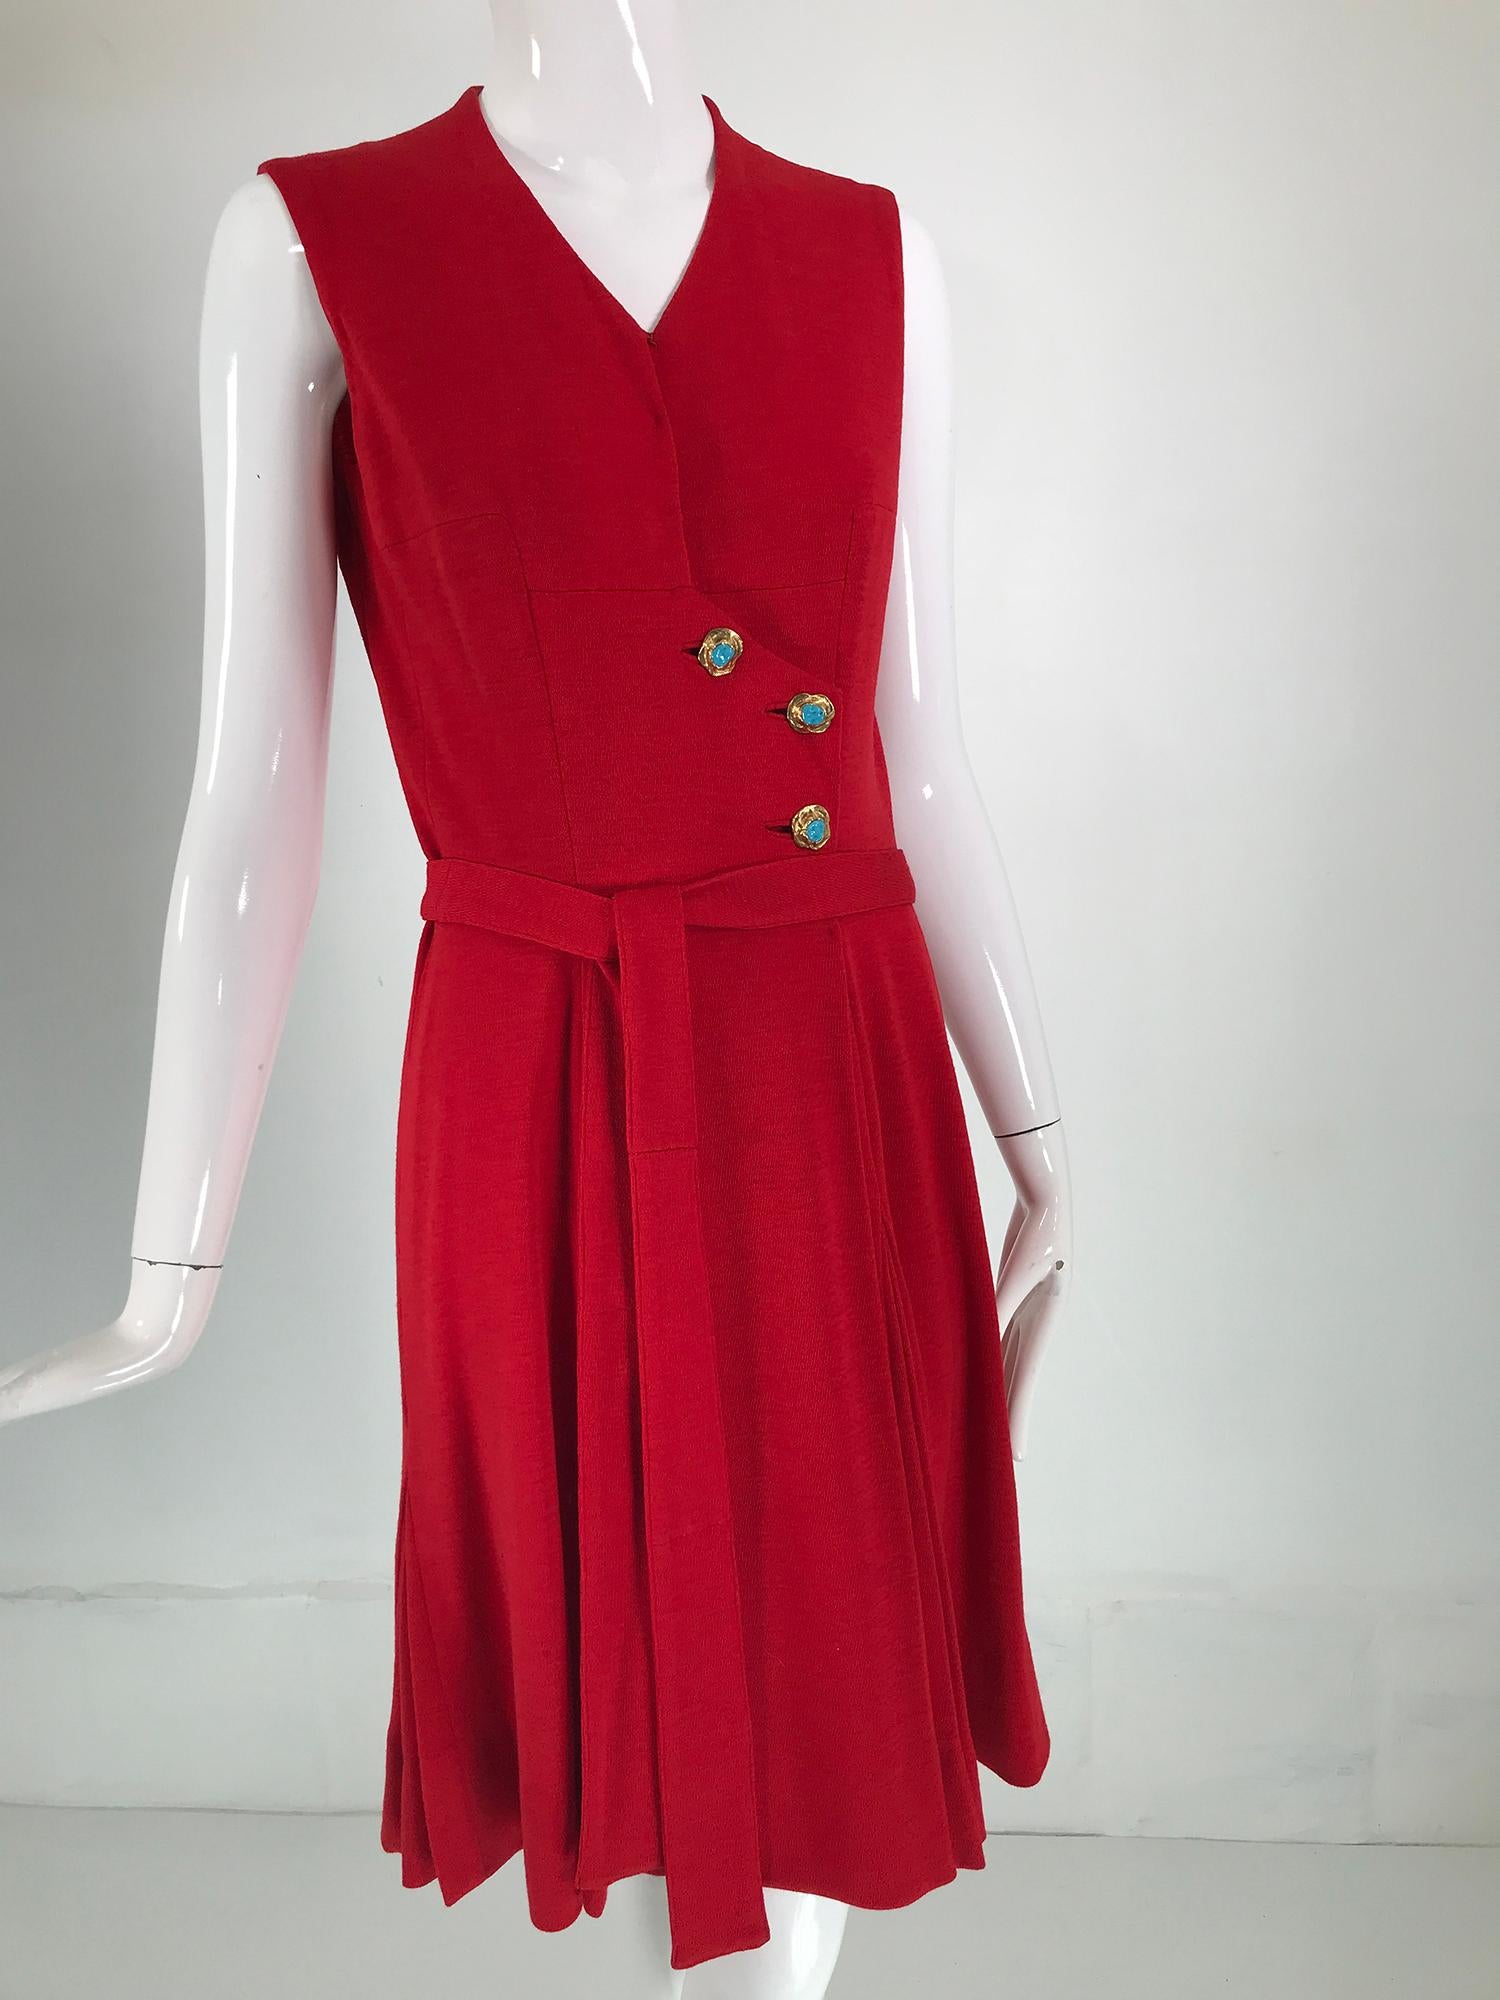 Coco Chanel Red Haute Couture 1950s 2 pc Wool Jersey Jewel Button Dress & Coat  For Sale 9